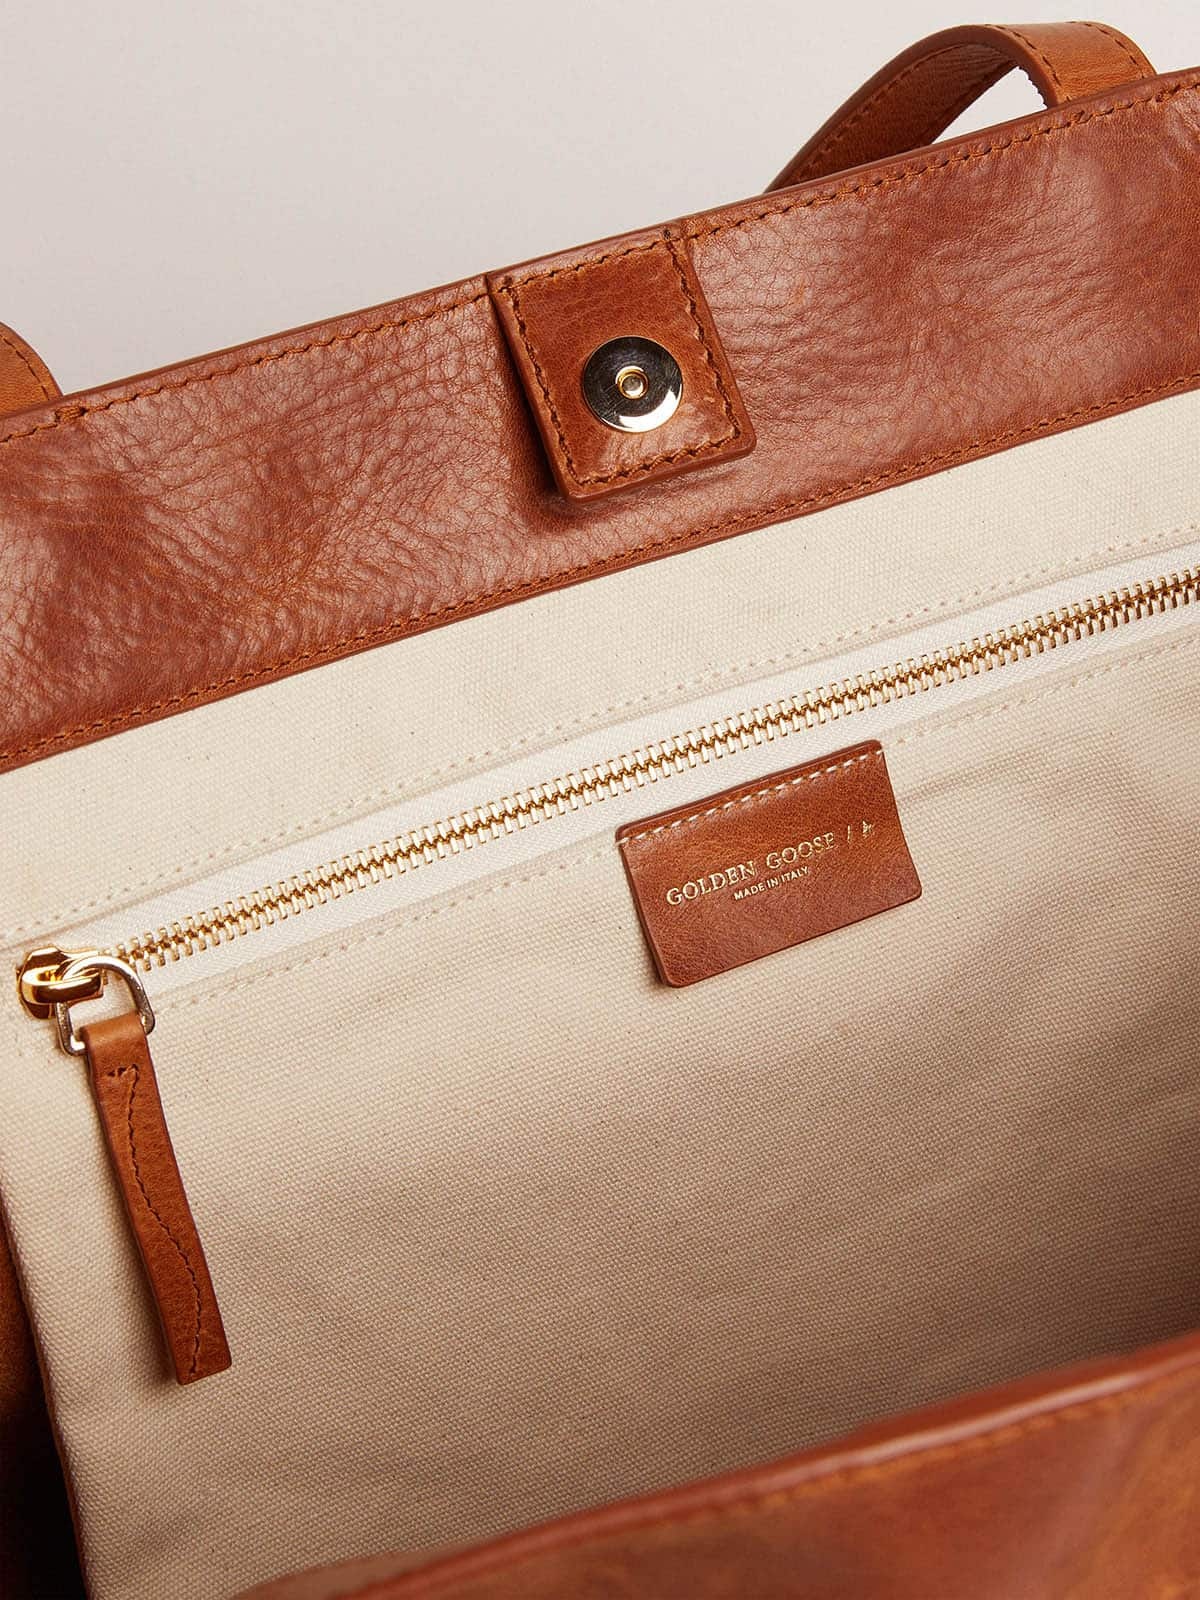 Pasadena Bag in tan-colored glossy leather with gold logo on the front - 4